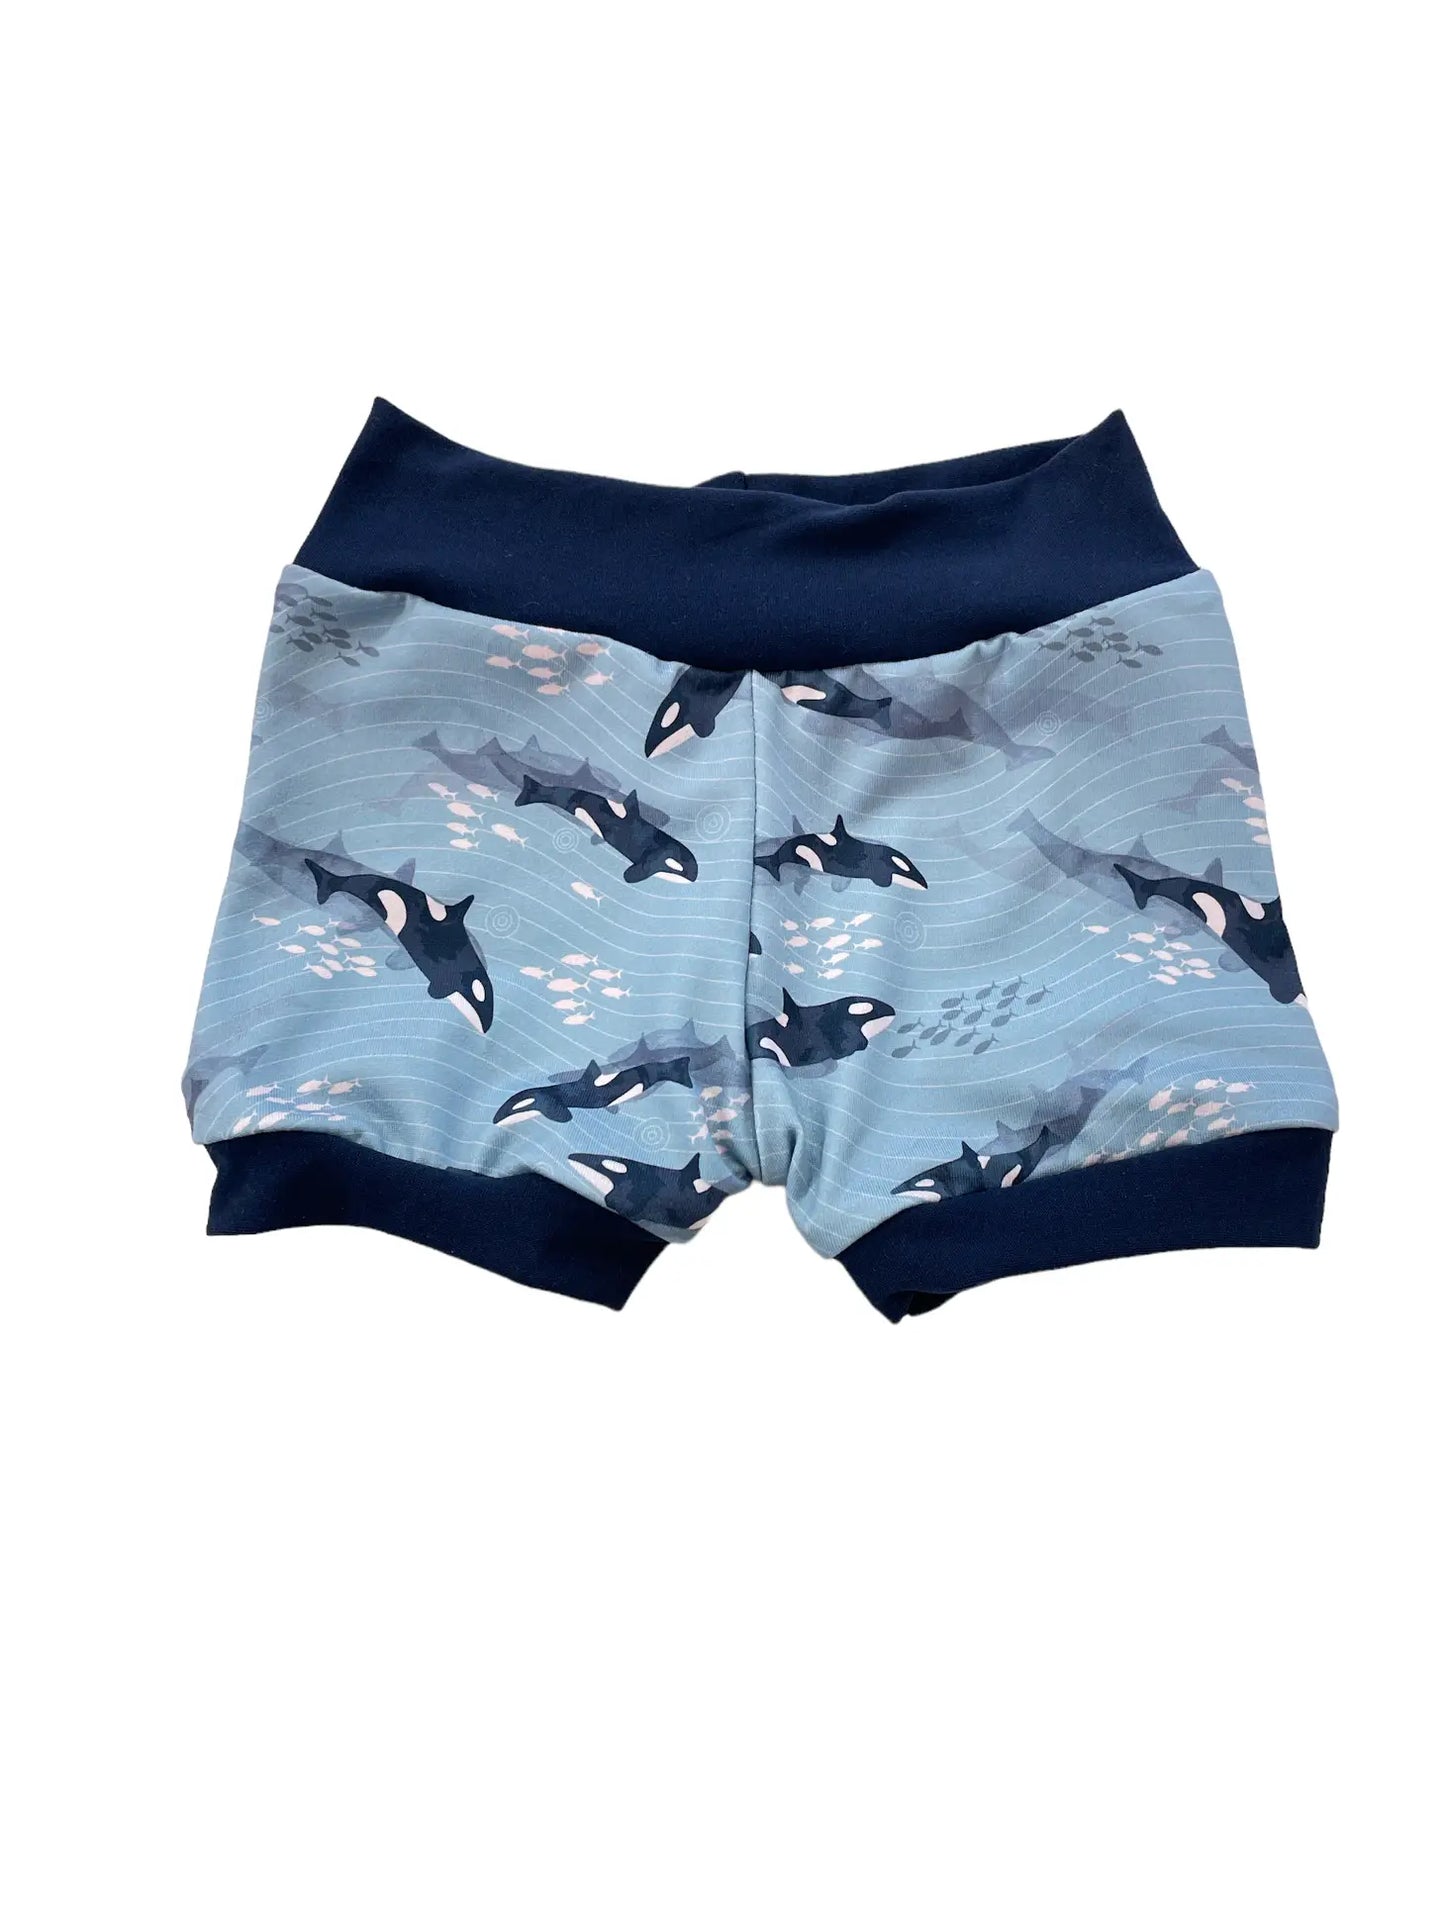 Whale Infant/Toddler Shorties